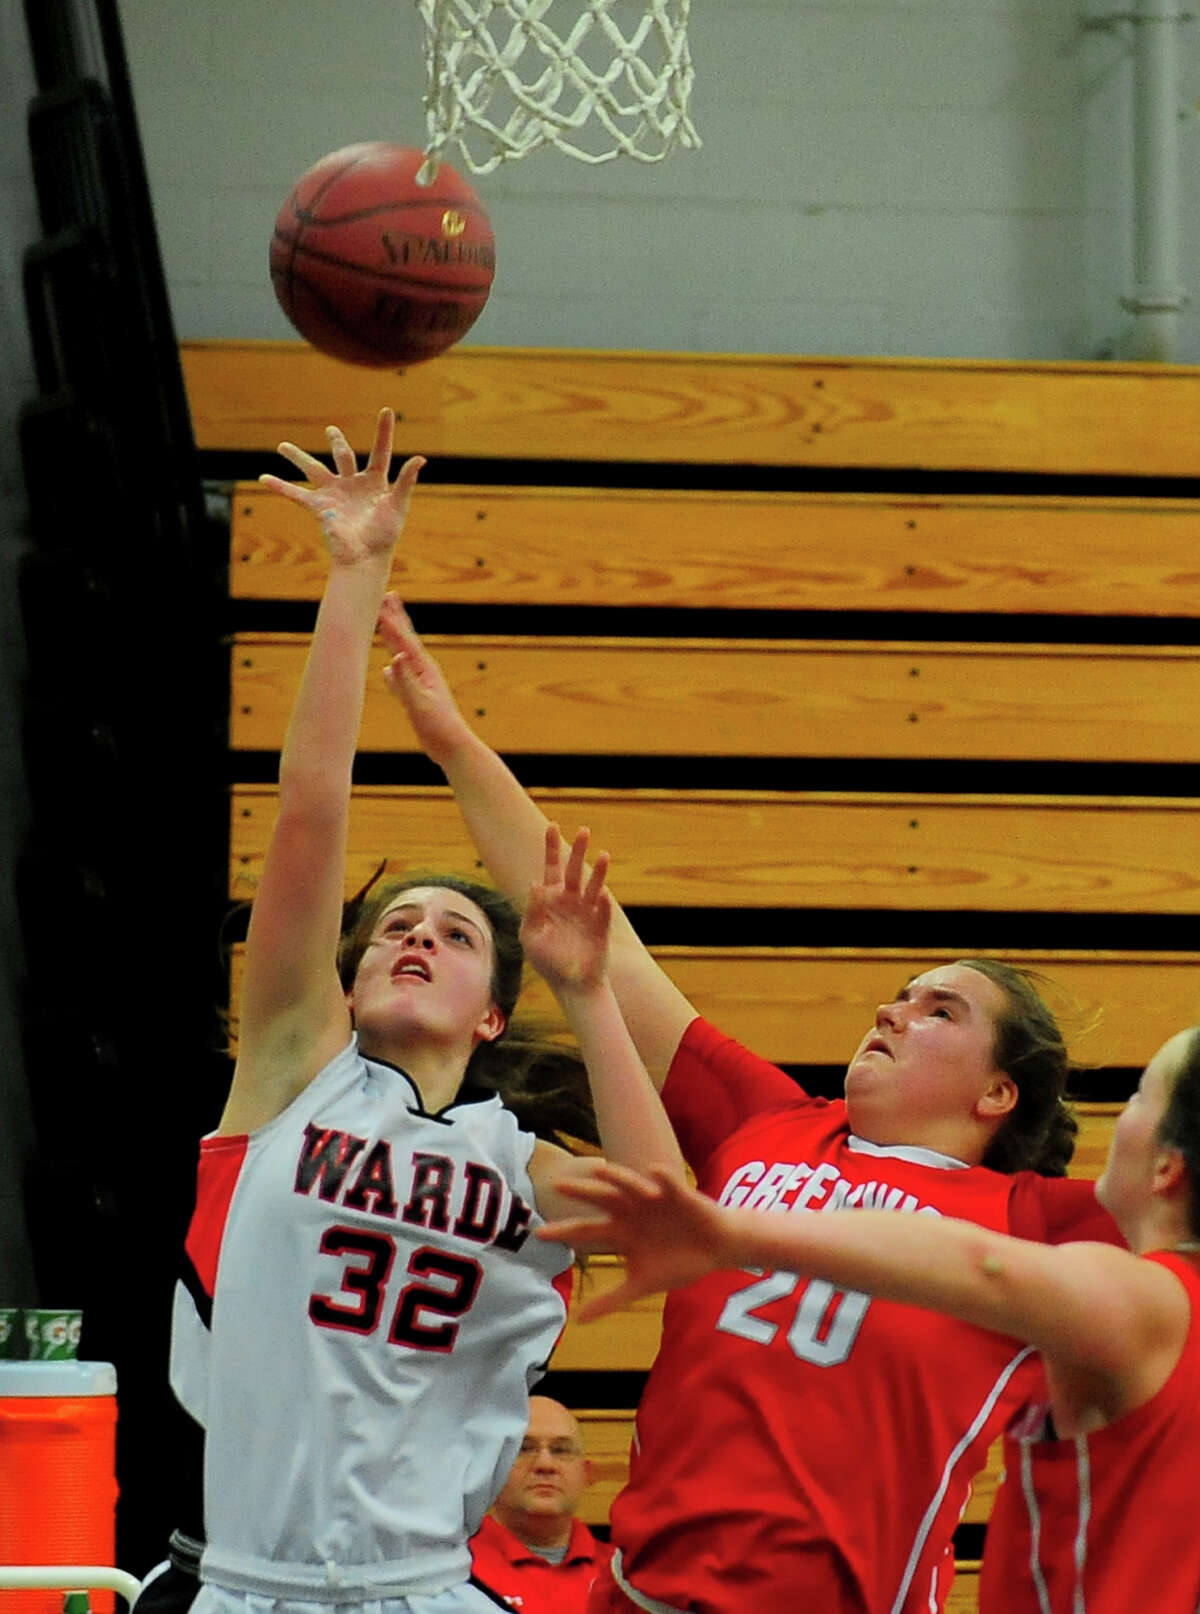 Fairfield Warde's Olivia Parisi sends the ball to the hoop as Greenwich's Abigail Wolf defends, during FCIAC Girls' Basketball Semi-finals action in Fairfield, Conn. on Tuesday Feb. 24, 2015.